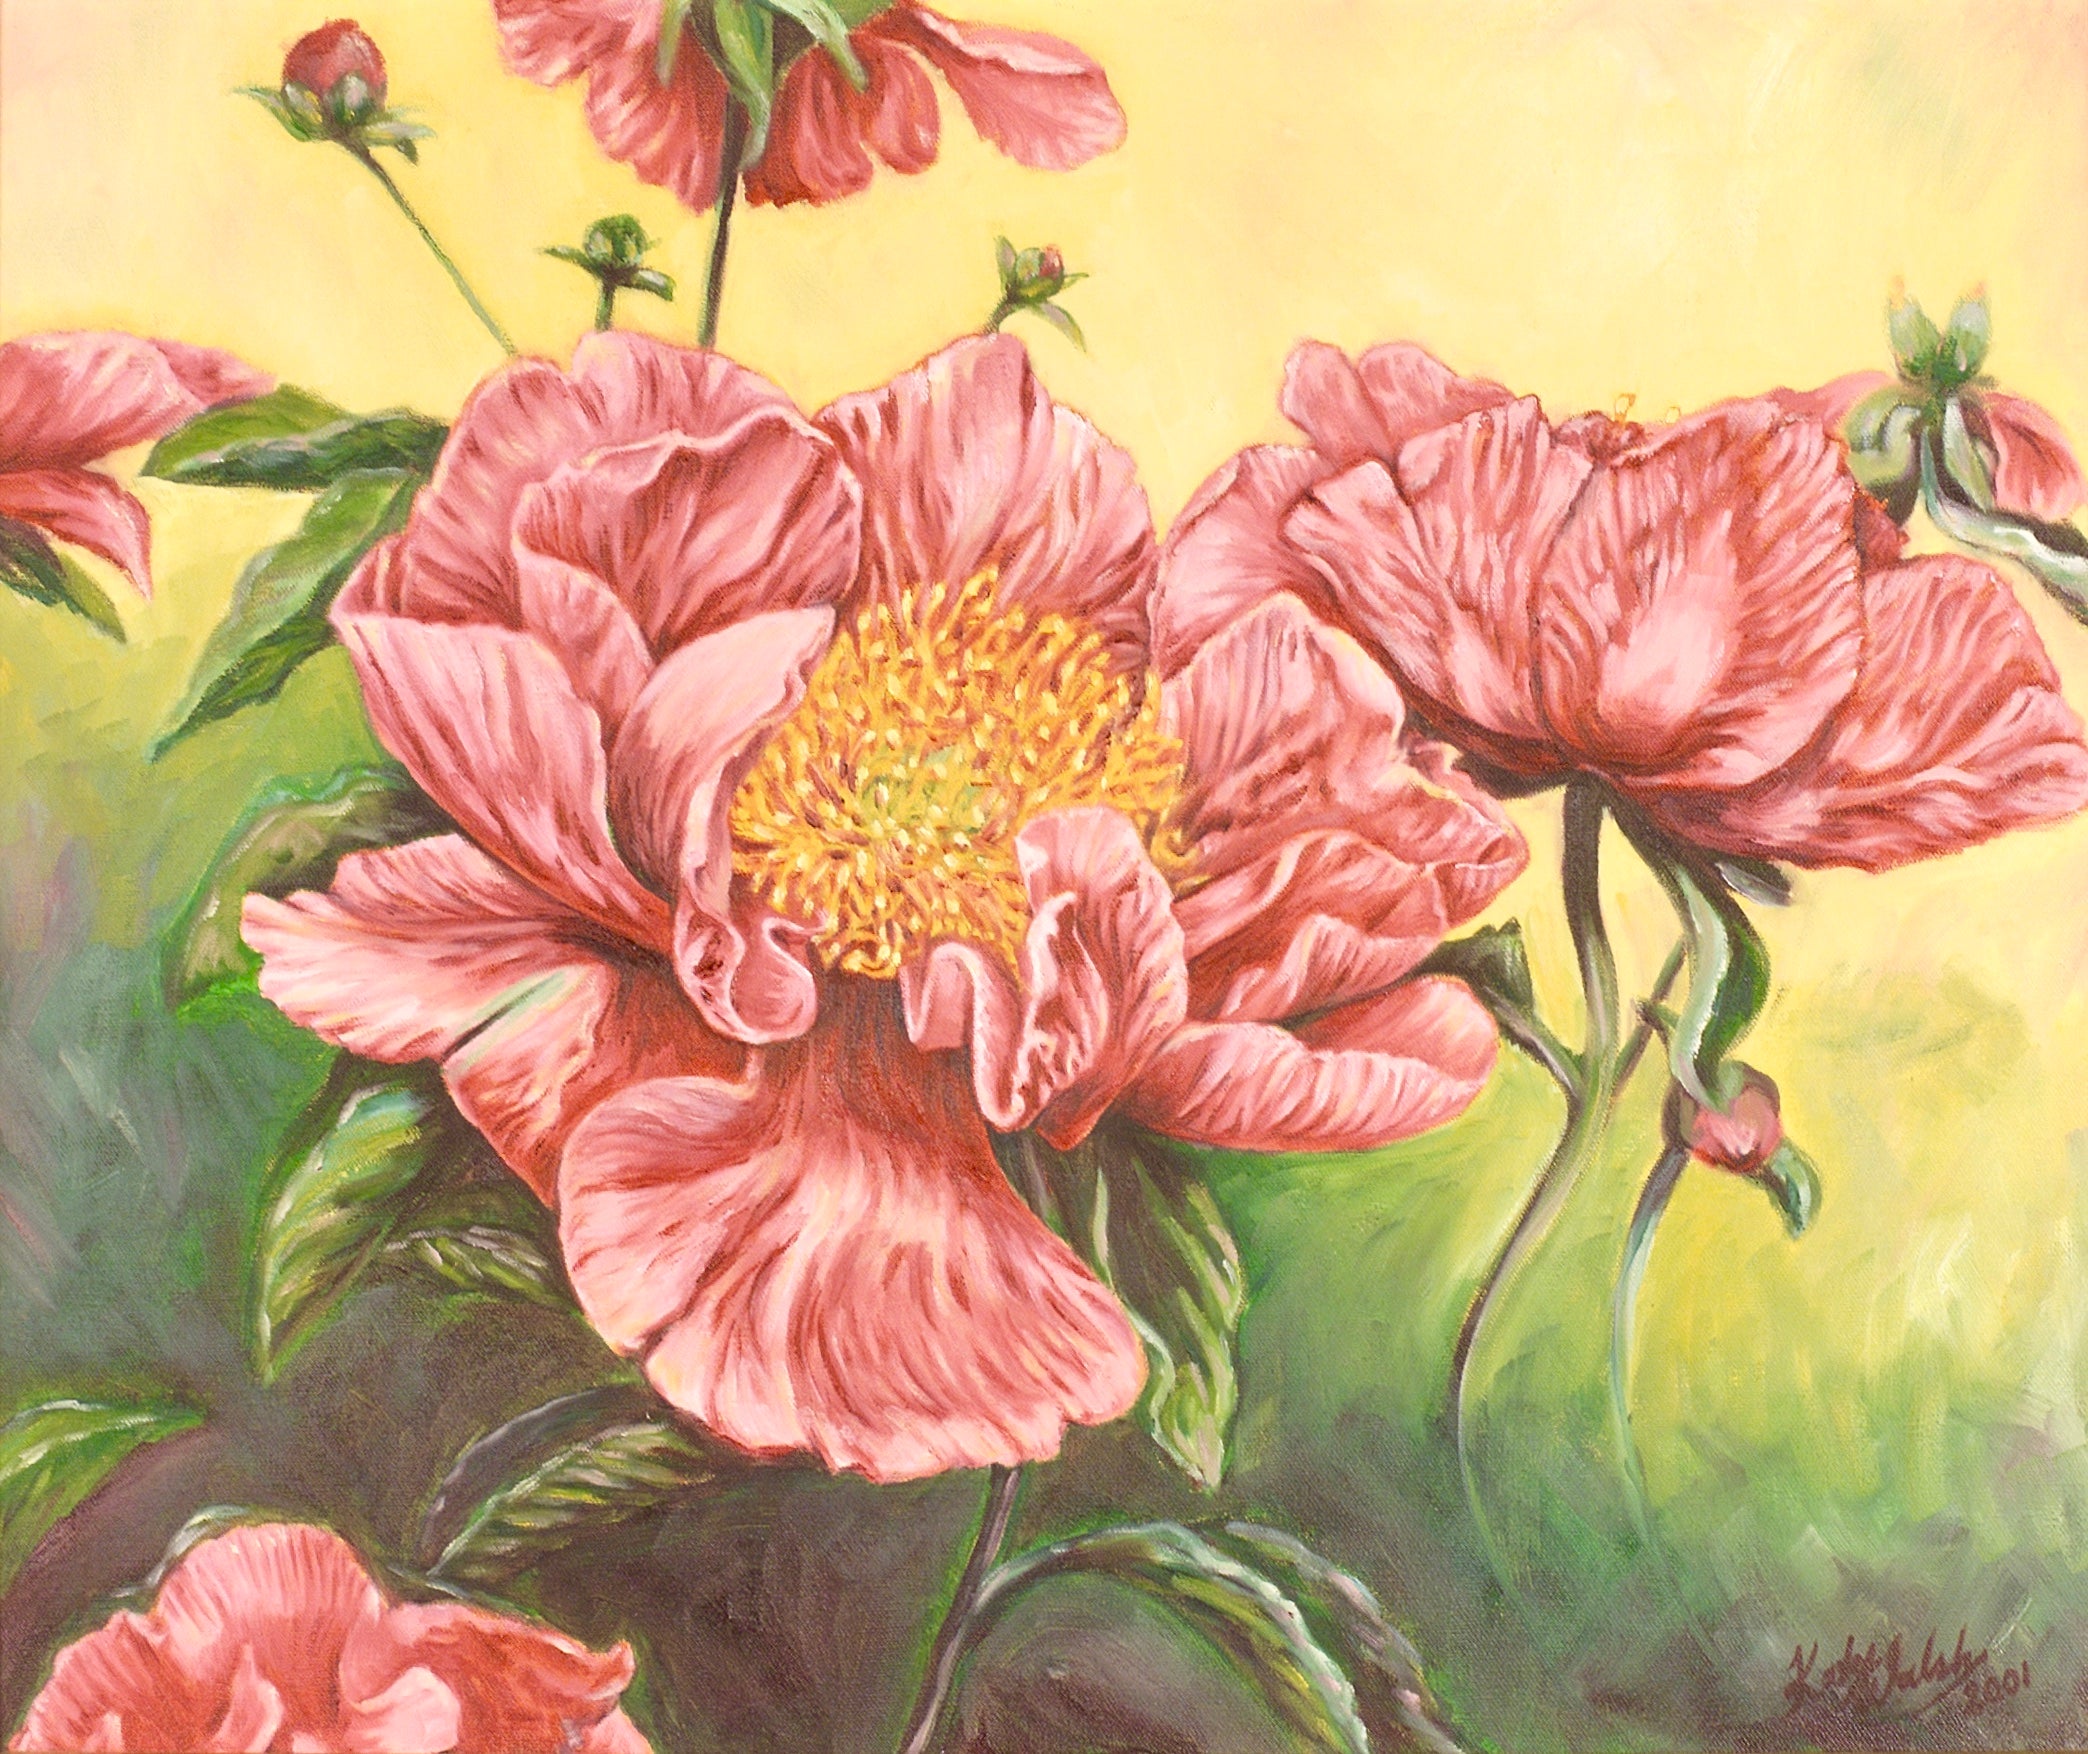 'Fairy Dell' Paeony, 50cm x 50cm, Not for sale.